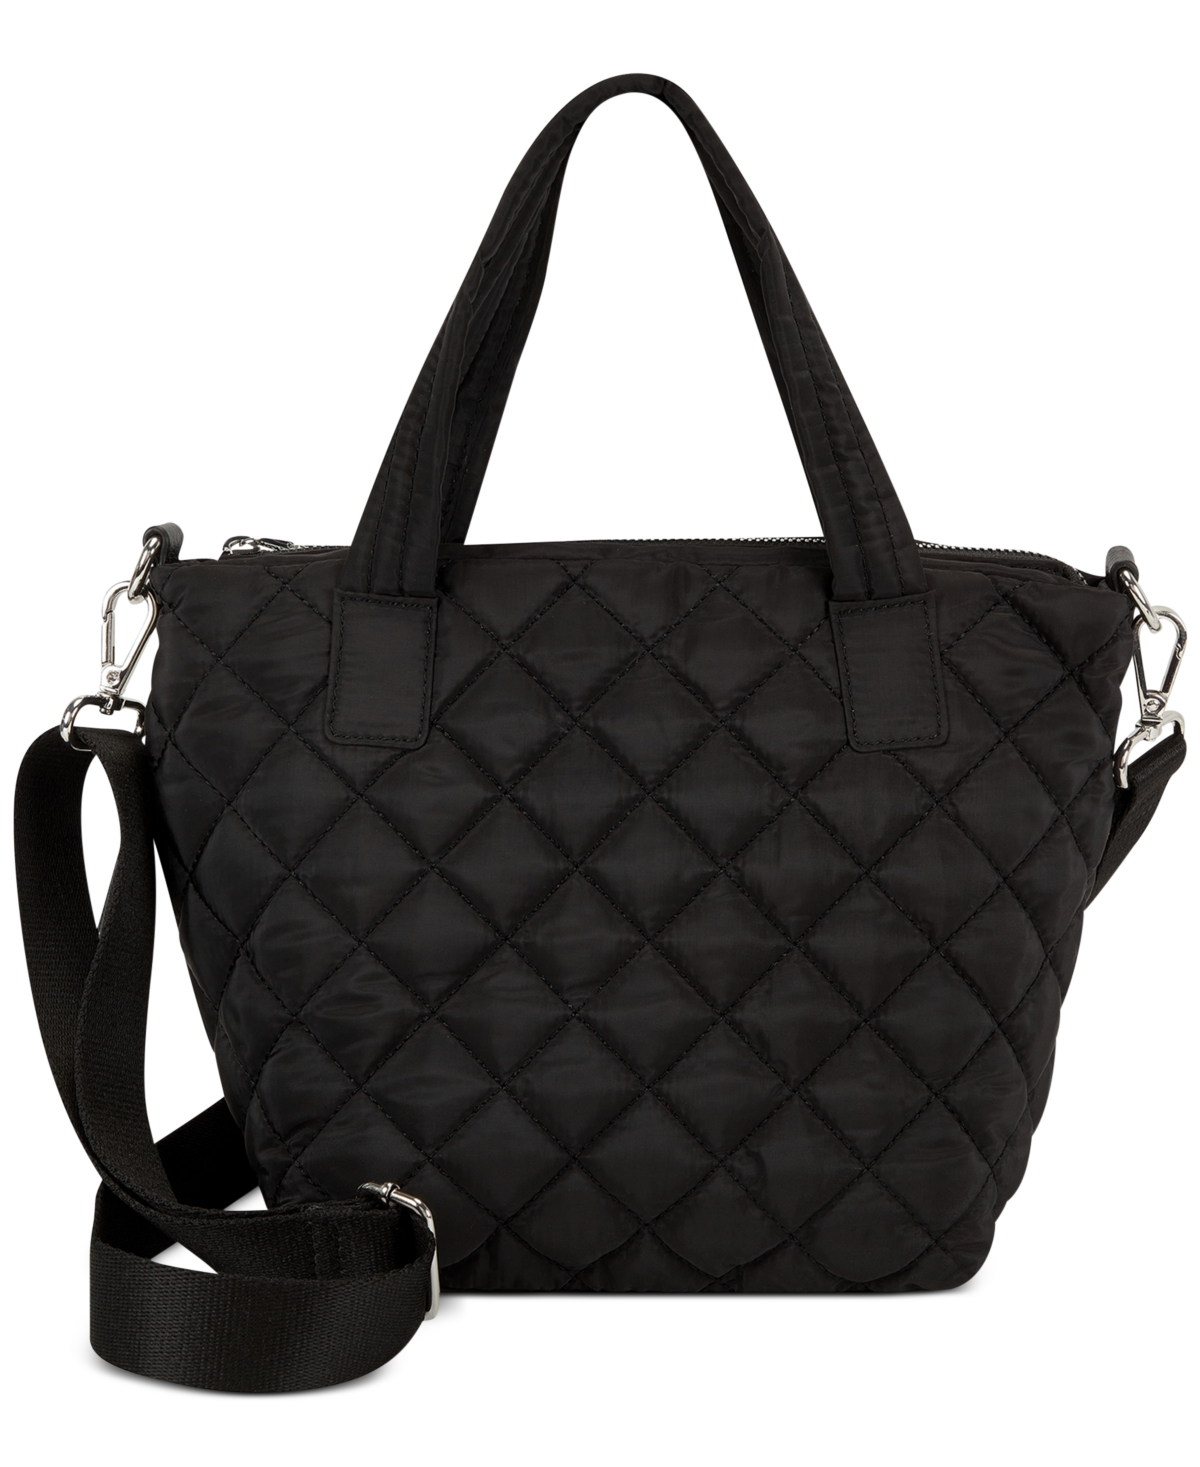 INC INTERNATIONAL CONCEPTS SMALL BREEAH QUILTED TOTE, CREATED FOR MACY'S